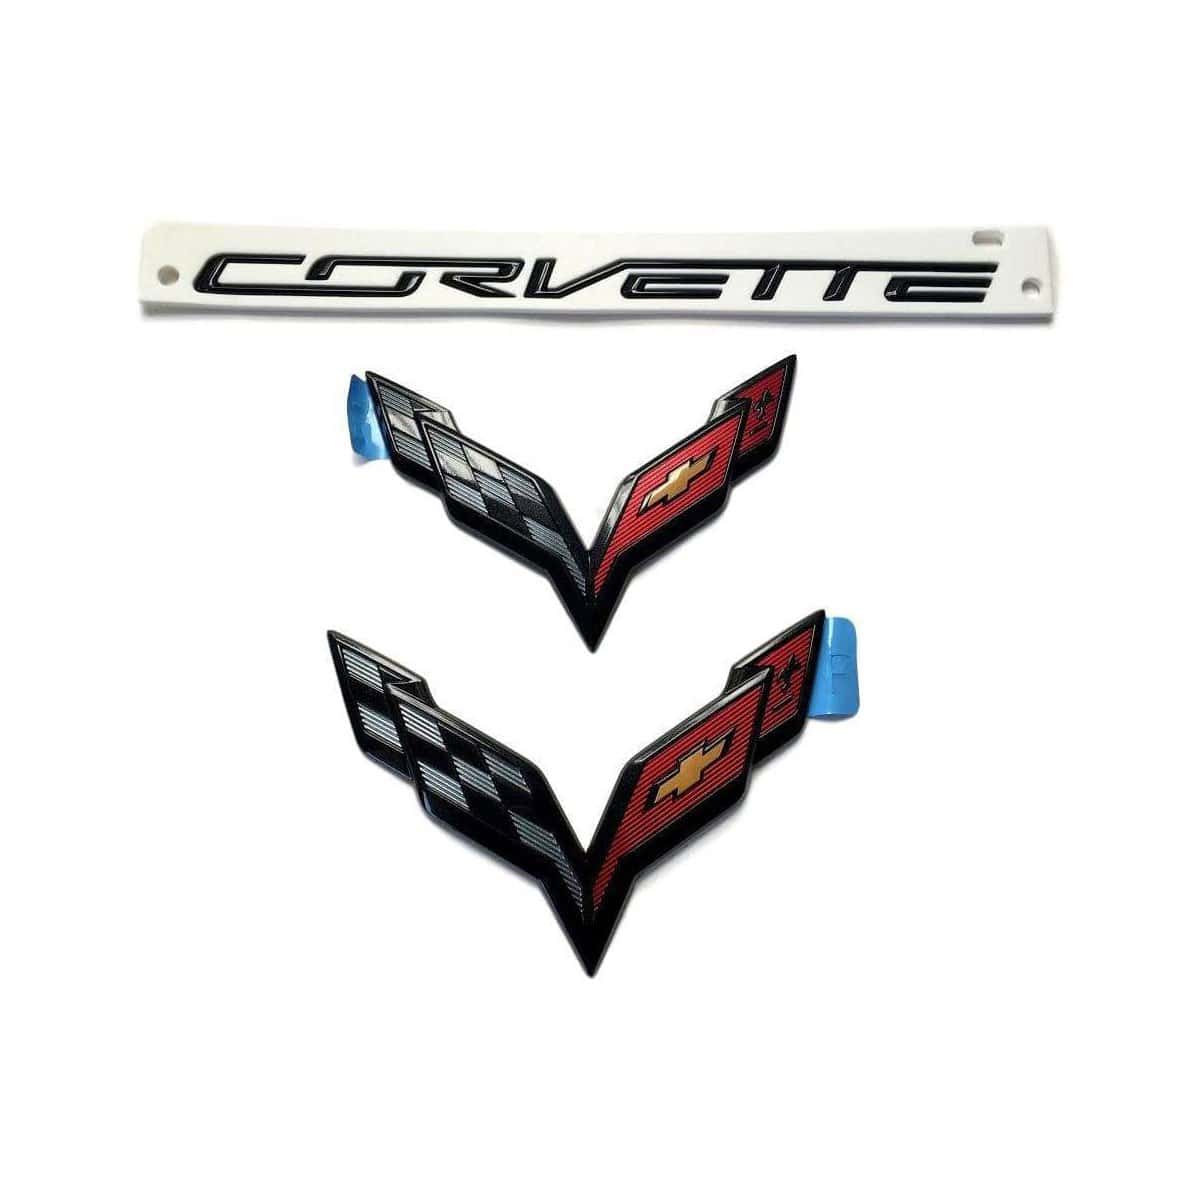 C7 Corvette Carbon Flash Emblem Kit [45-4-130]CFZ: Front and rear emblems, lettering, and waterfall emblem for convertibles. Upgrade your Corvette's appearance with this high-quality, durable, and easy-to-install kit.